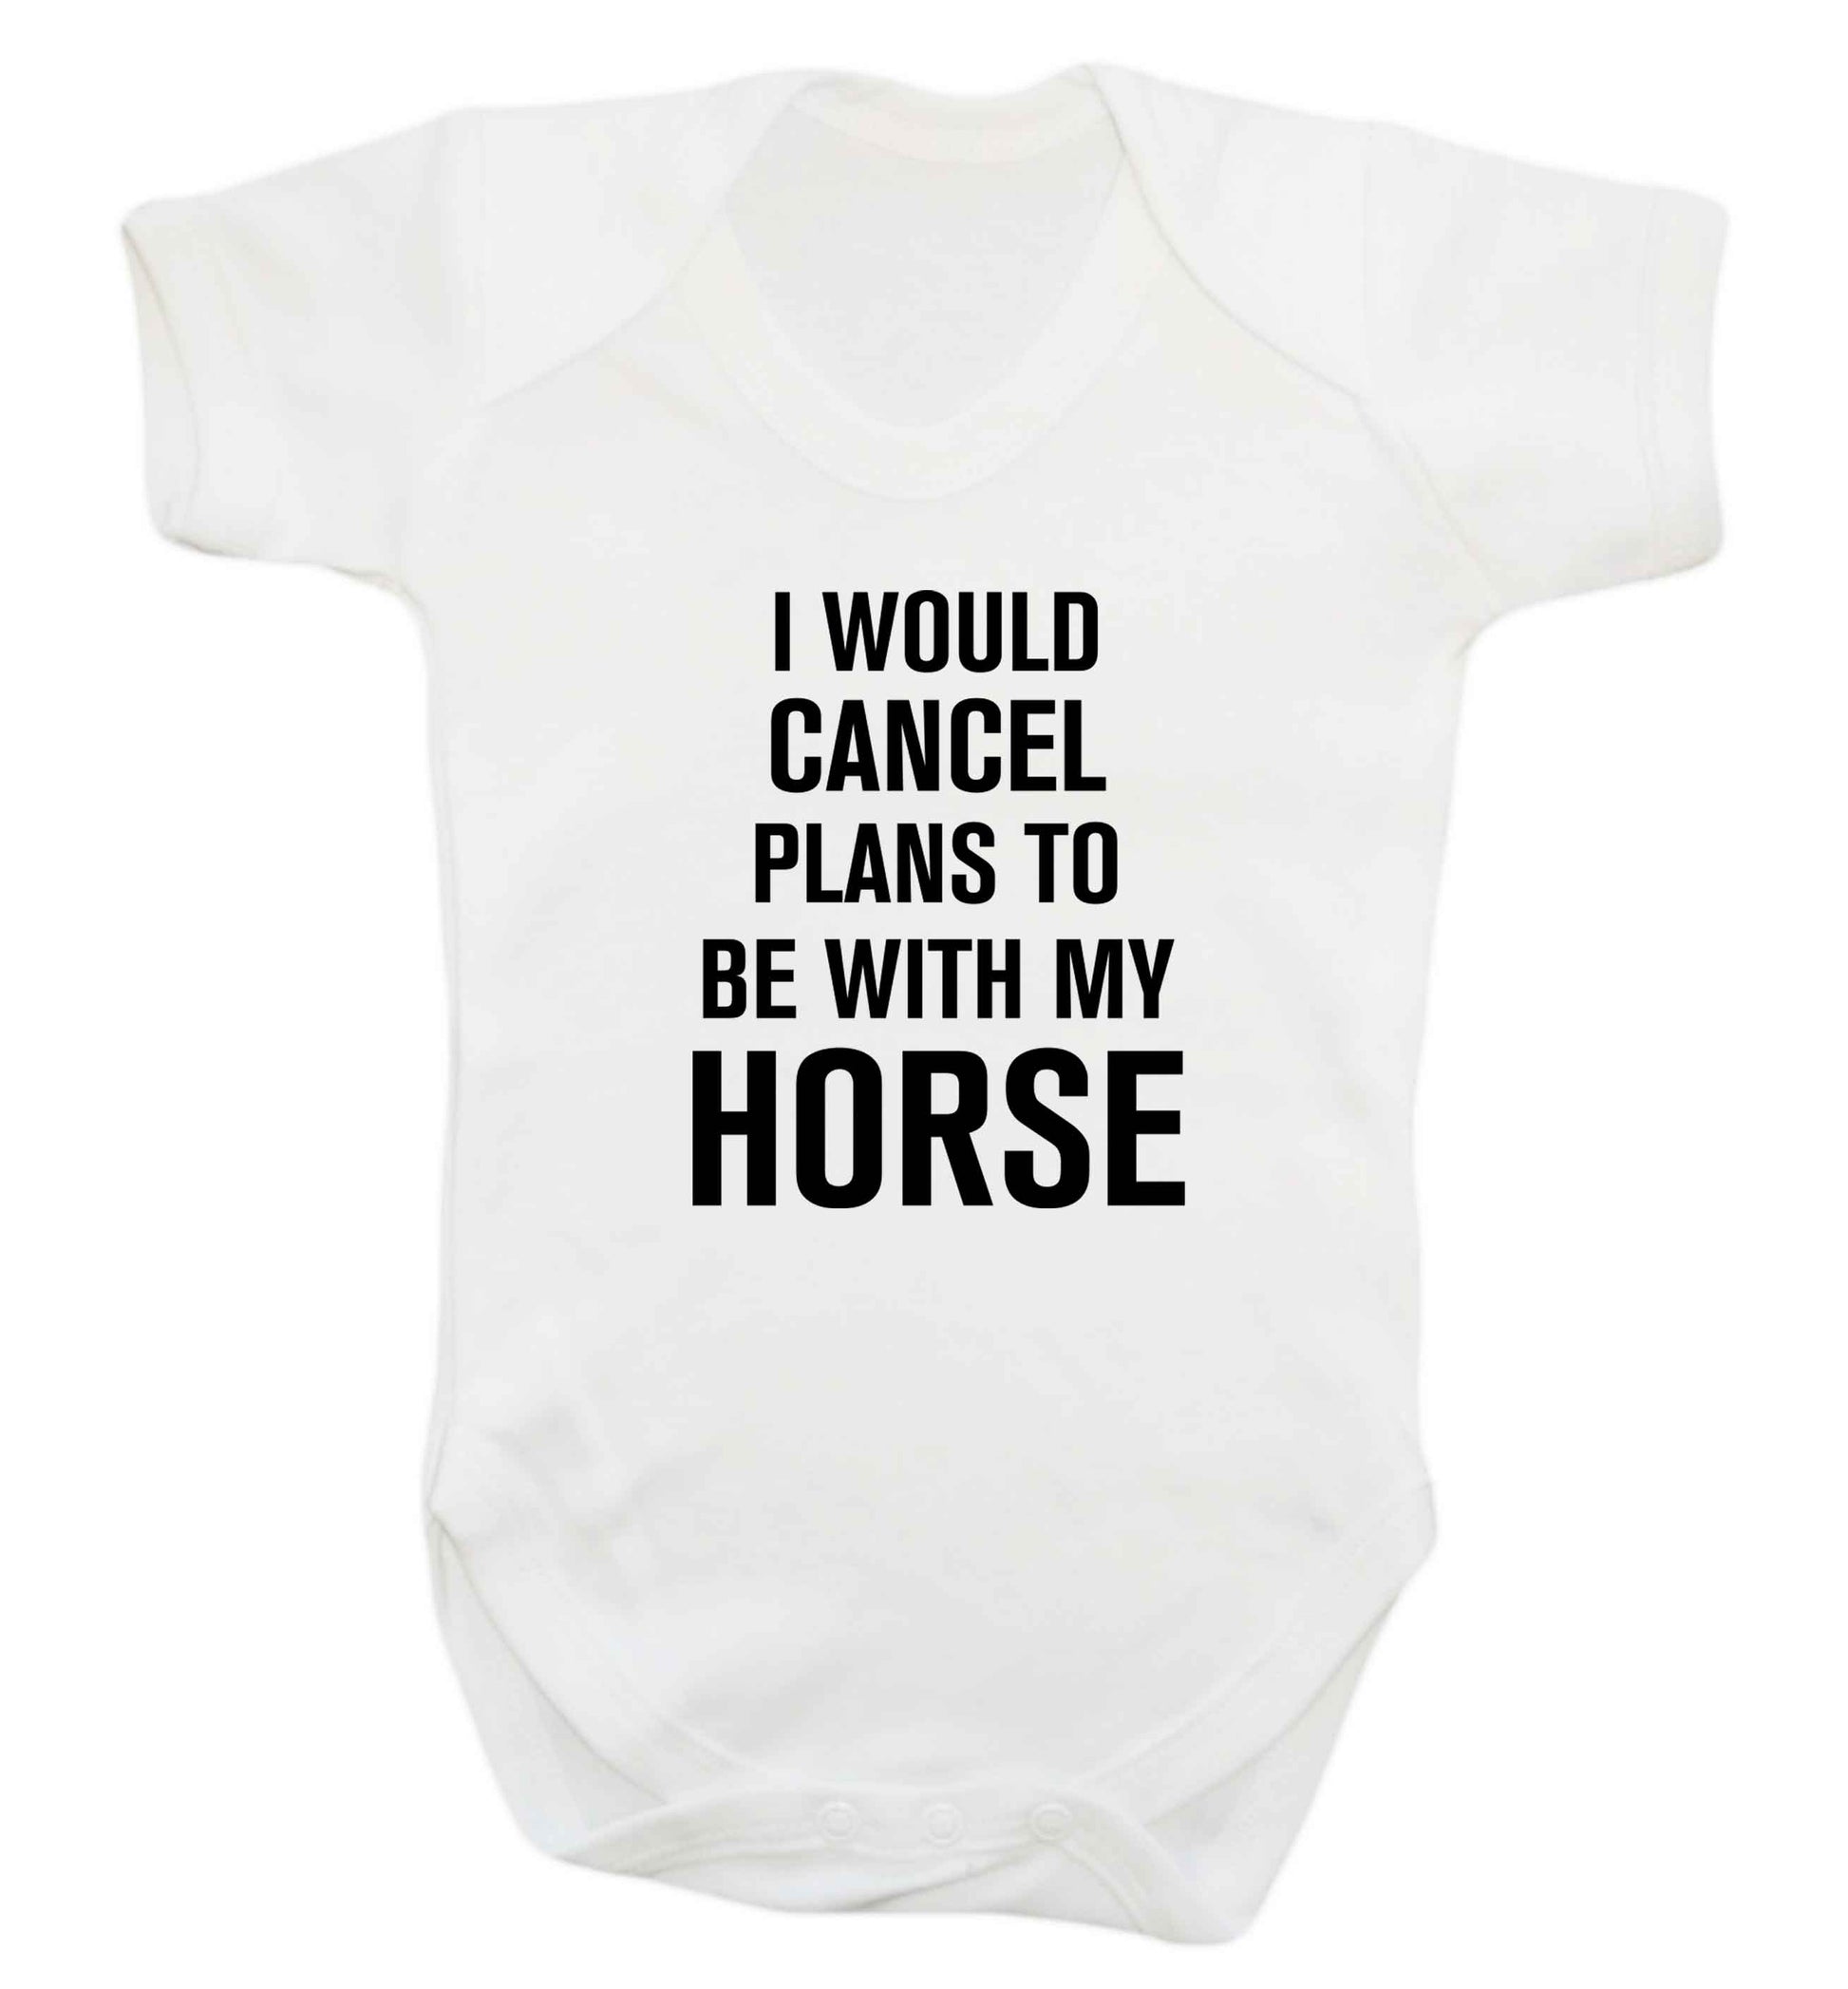 I will cancel plans to be with my horse baby vest white 18-24 months